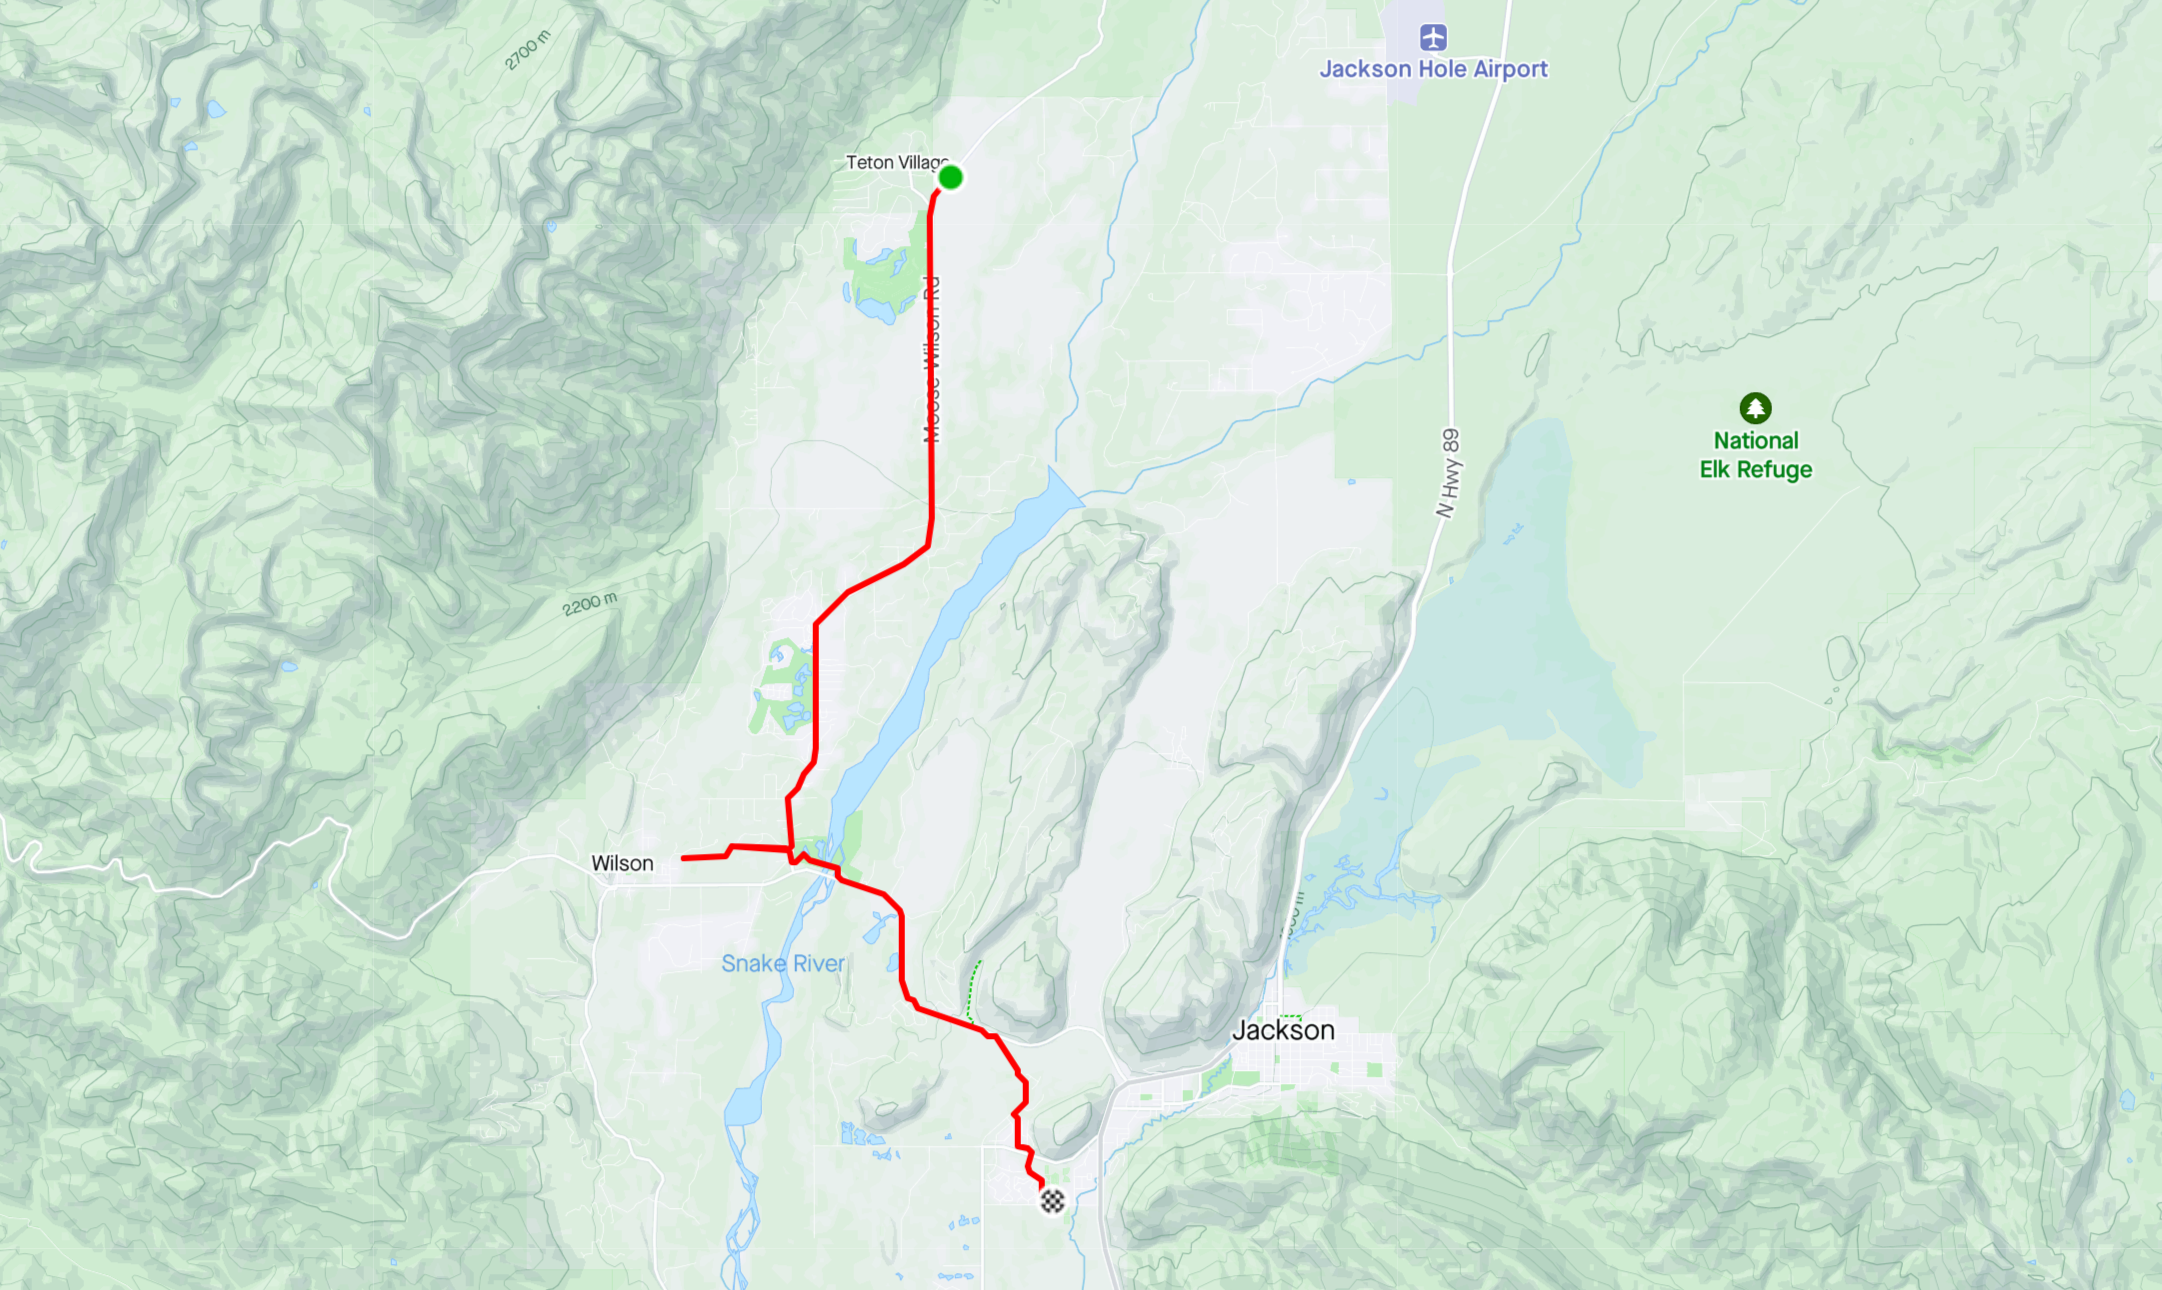 A map view of the race course of the Jackson Hole Half Marathon.